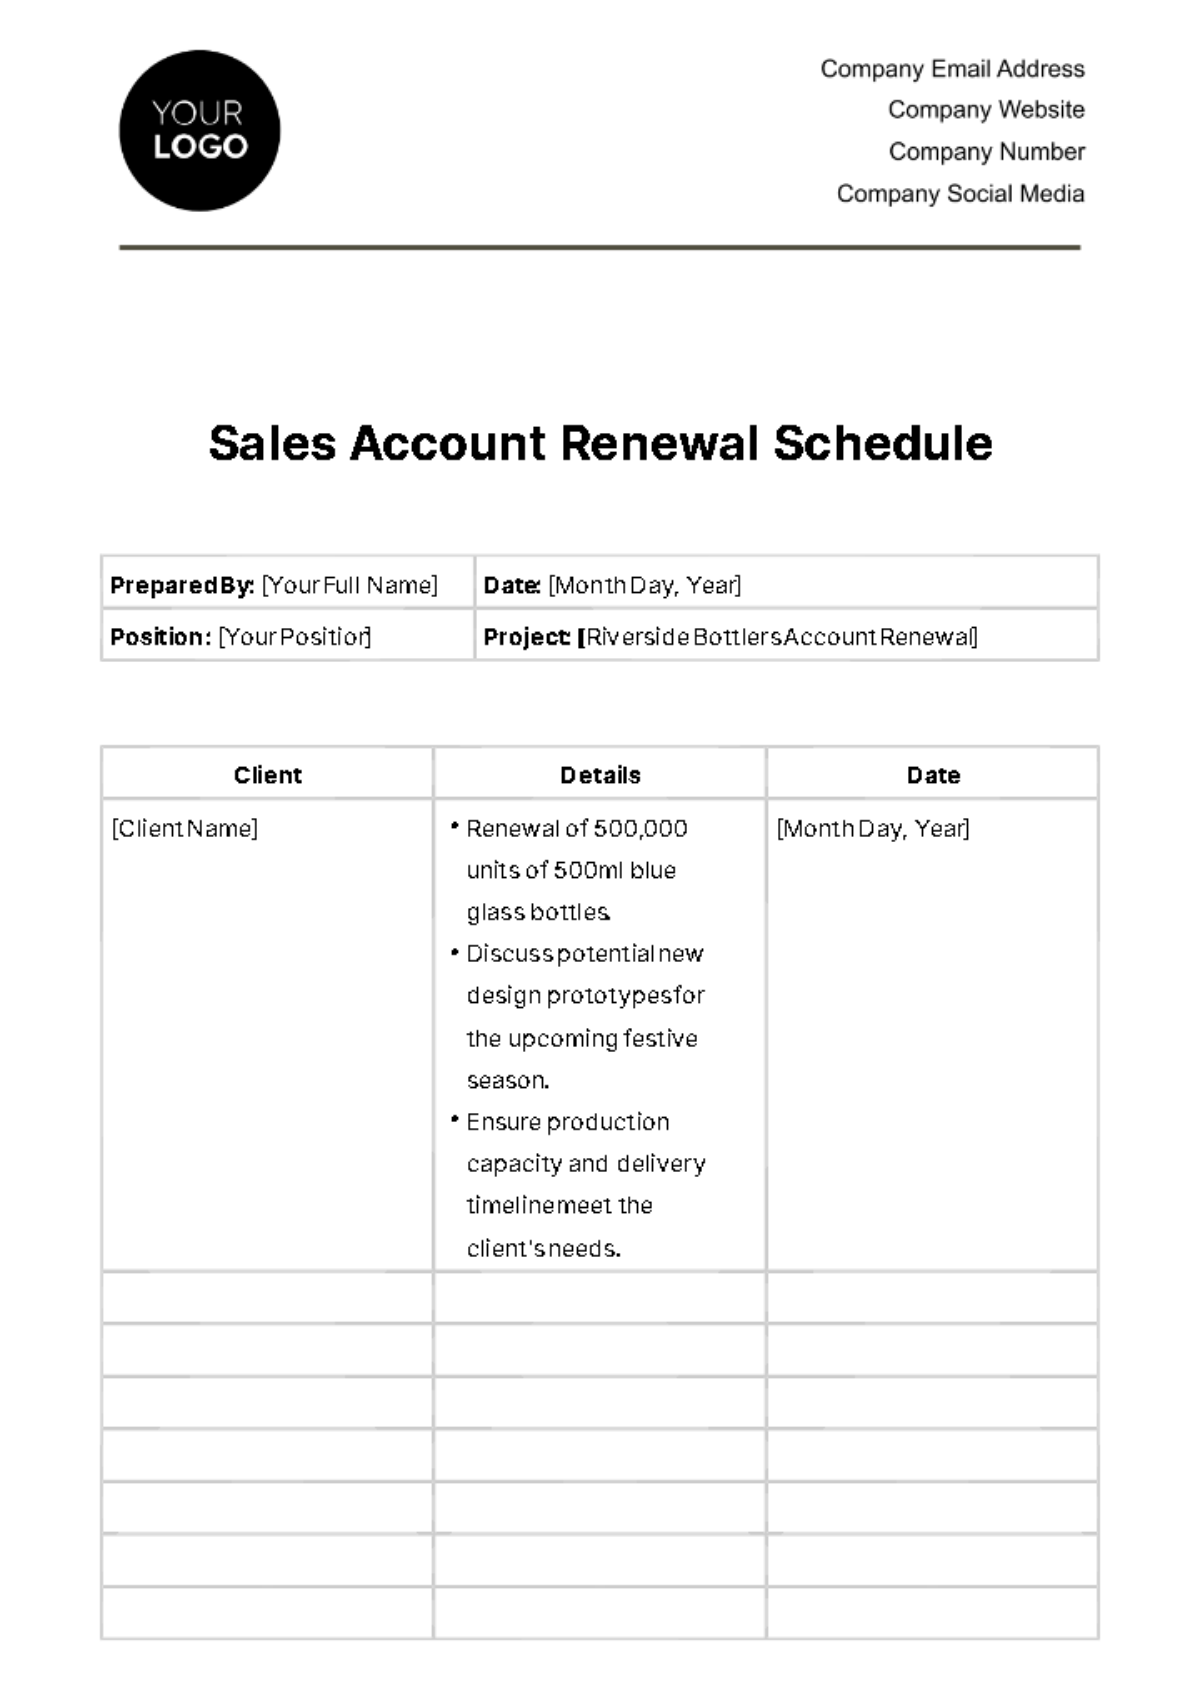 Free Sales Account Renewal Schedule Template